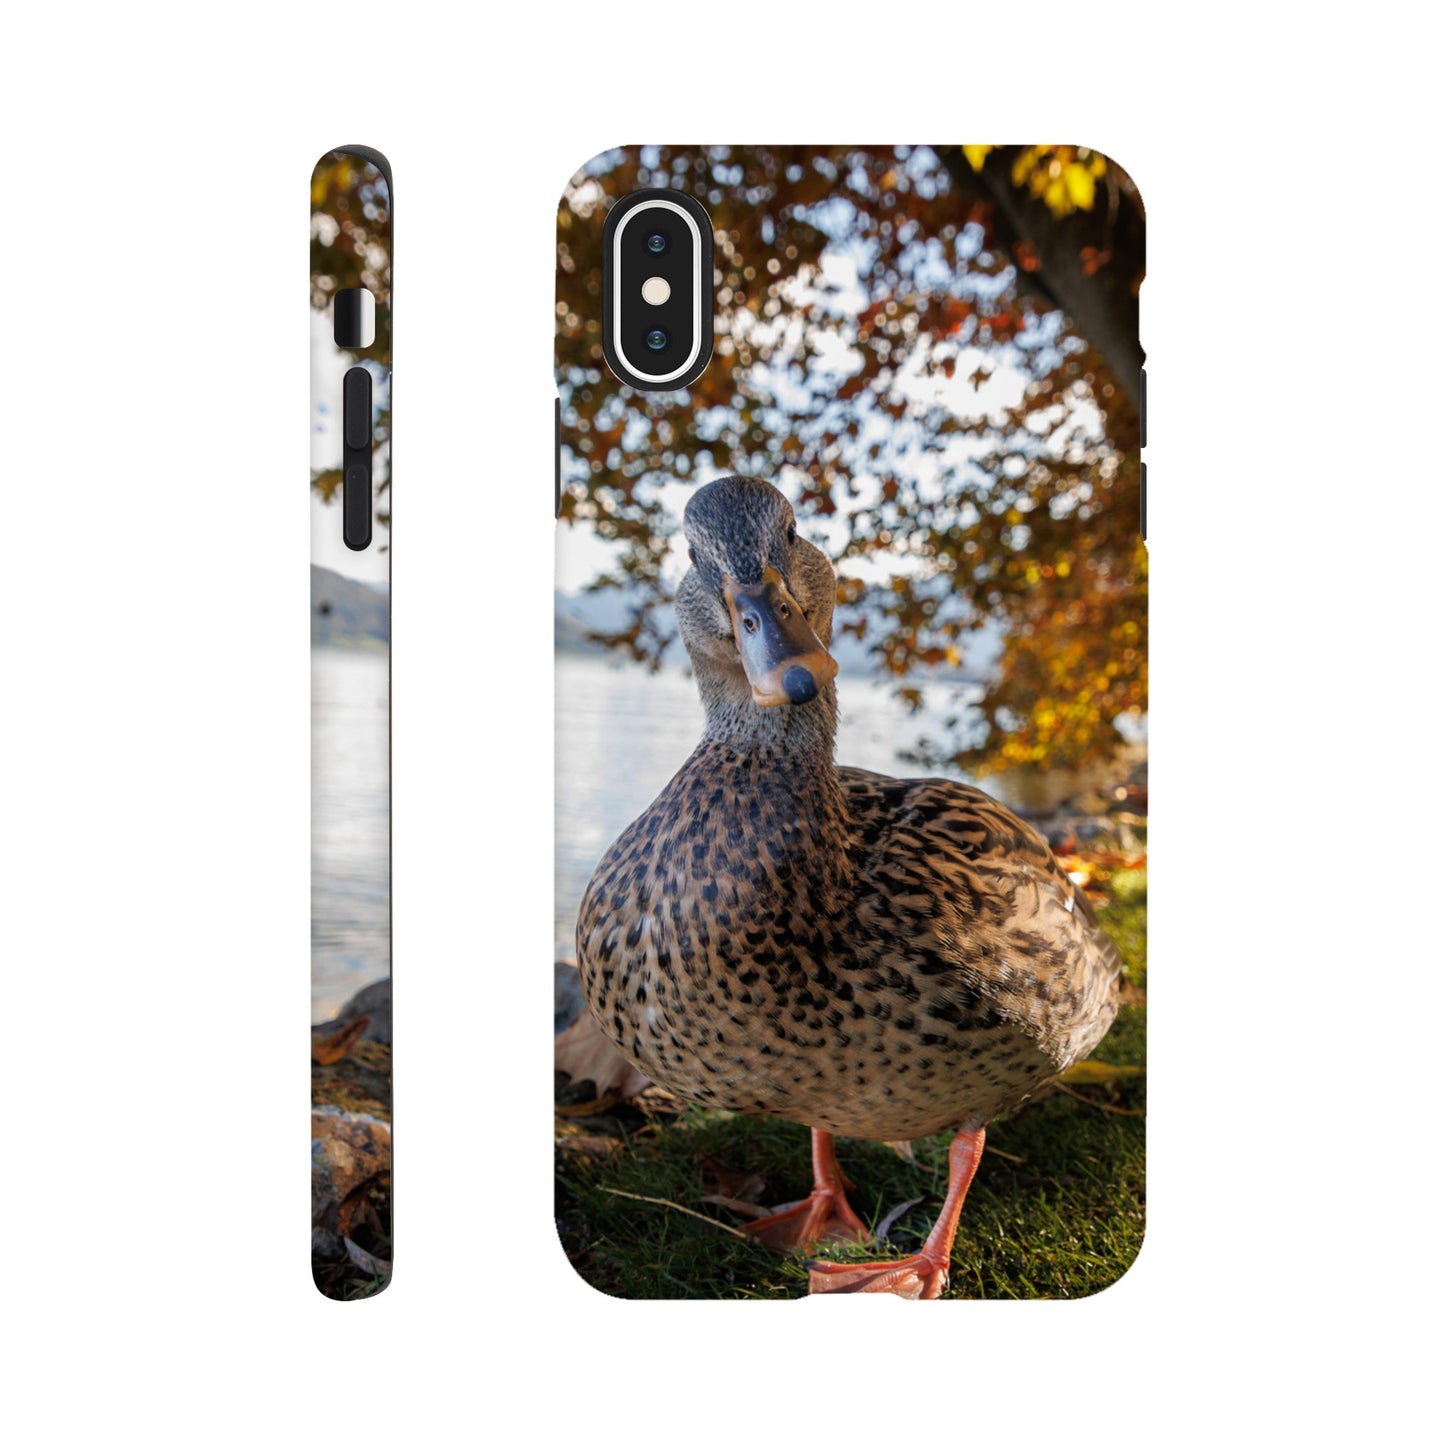 Autumnal duck idyll hard shell case mobile phone case for iPhone and Samsung 